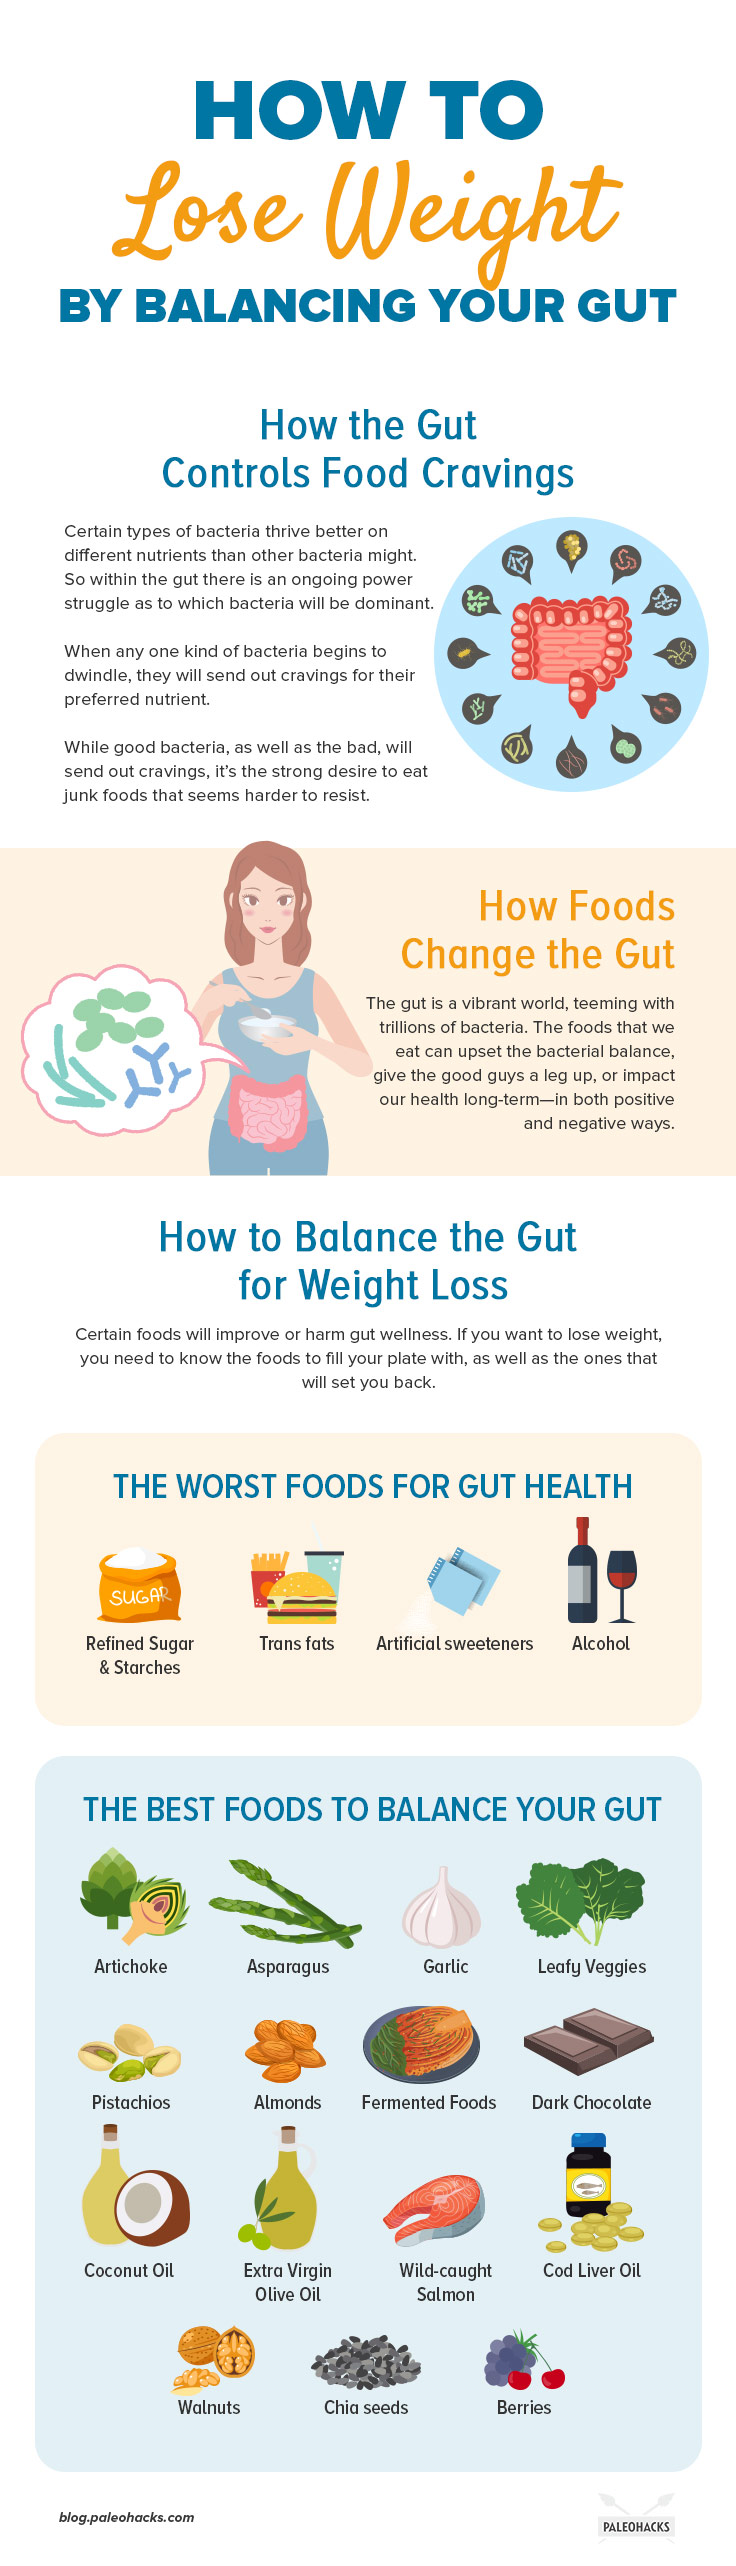 What if your food cravings are caused by your gut, and the best way to lose weight has nothing to do with counting calories or feeling deprived at all?